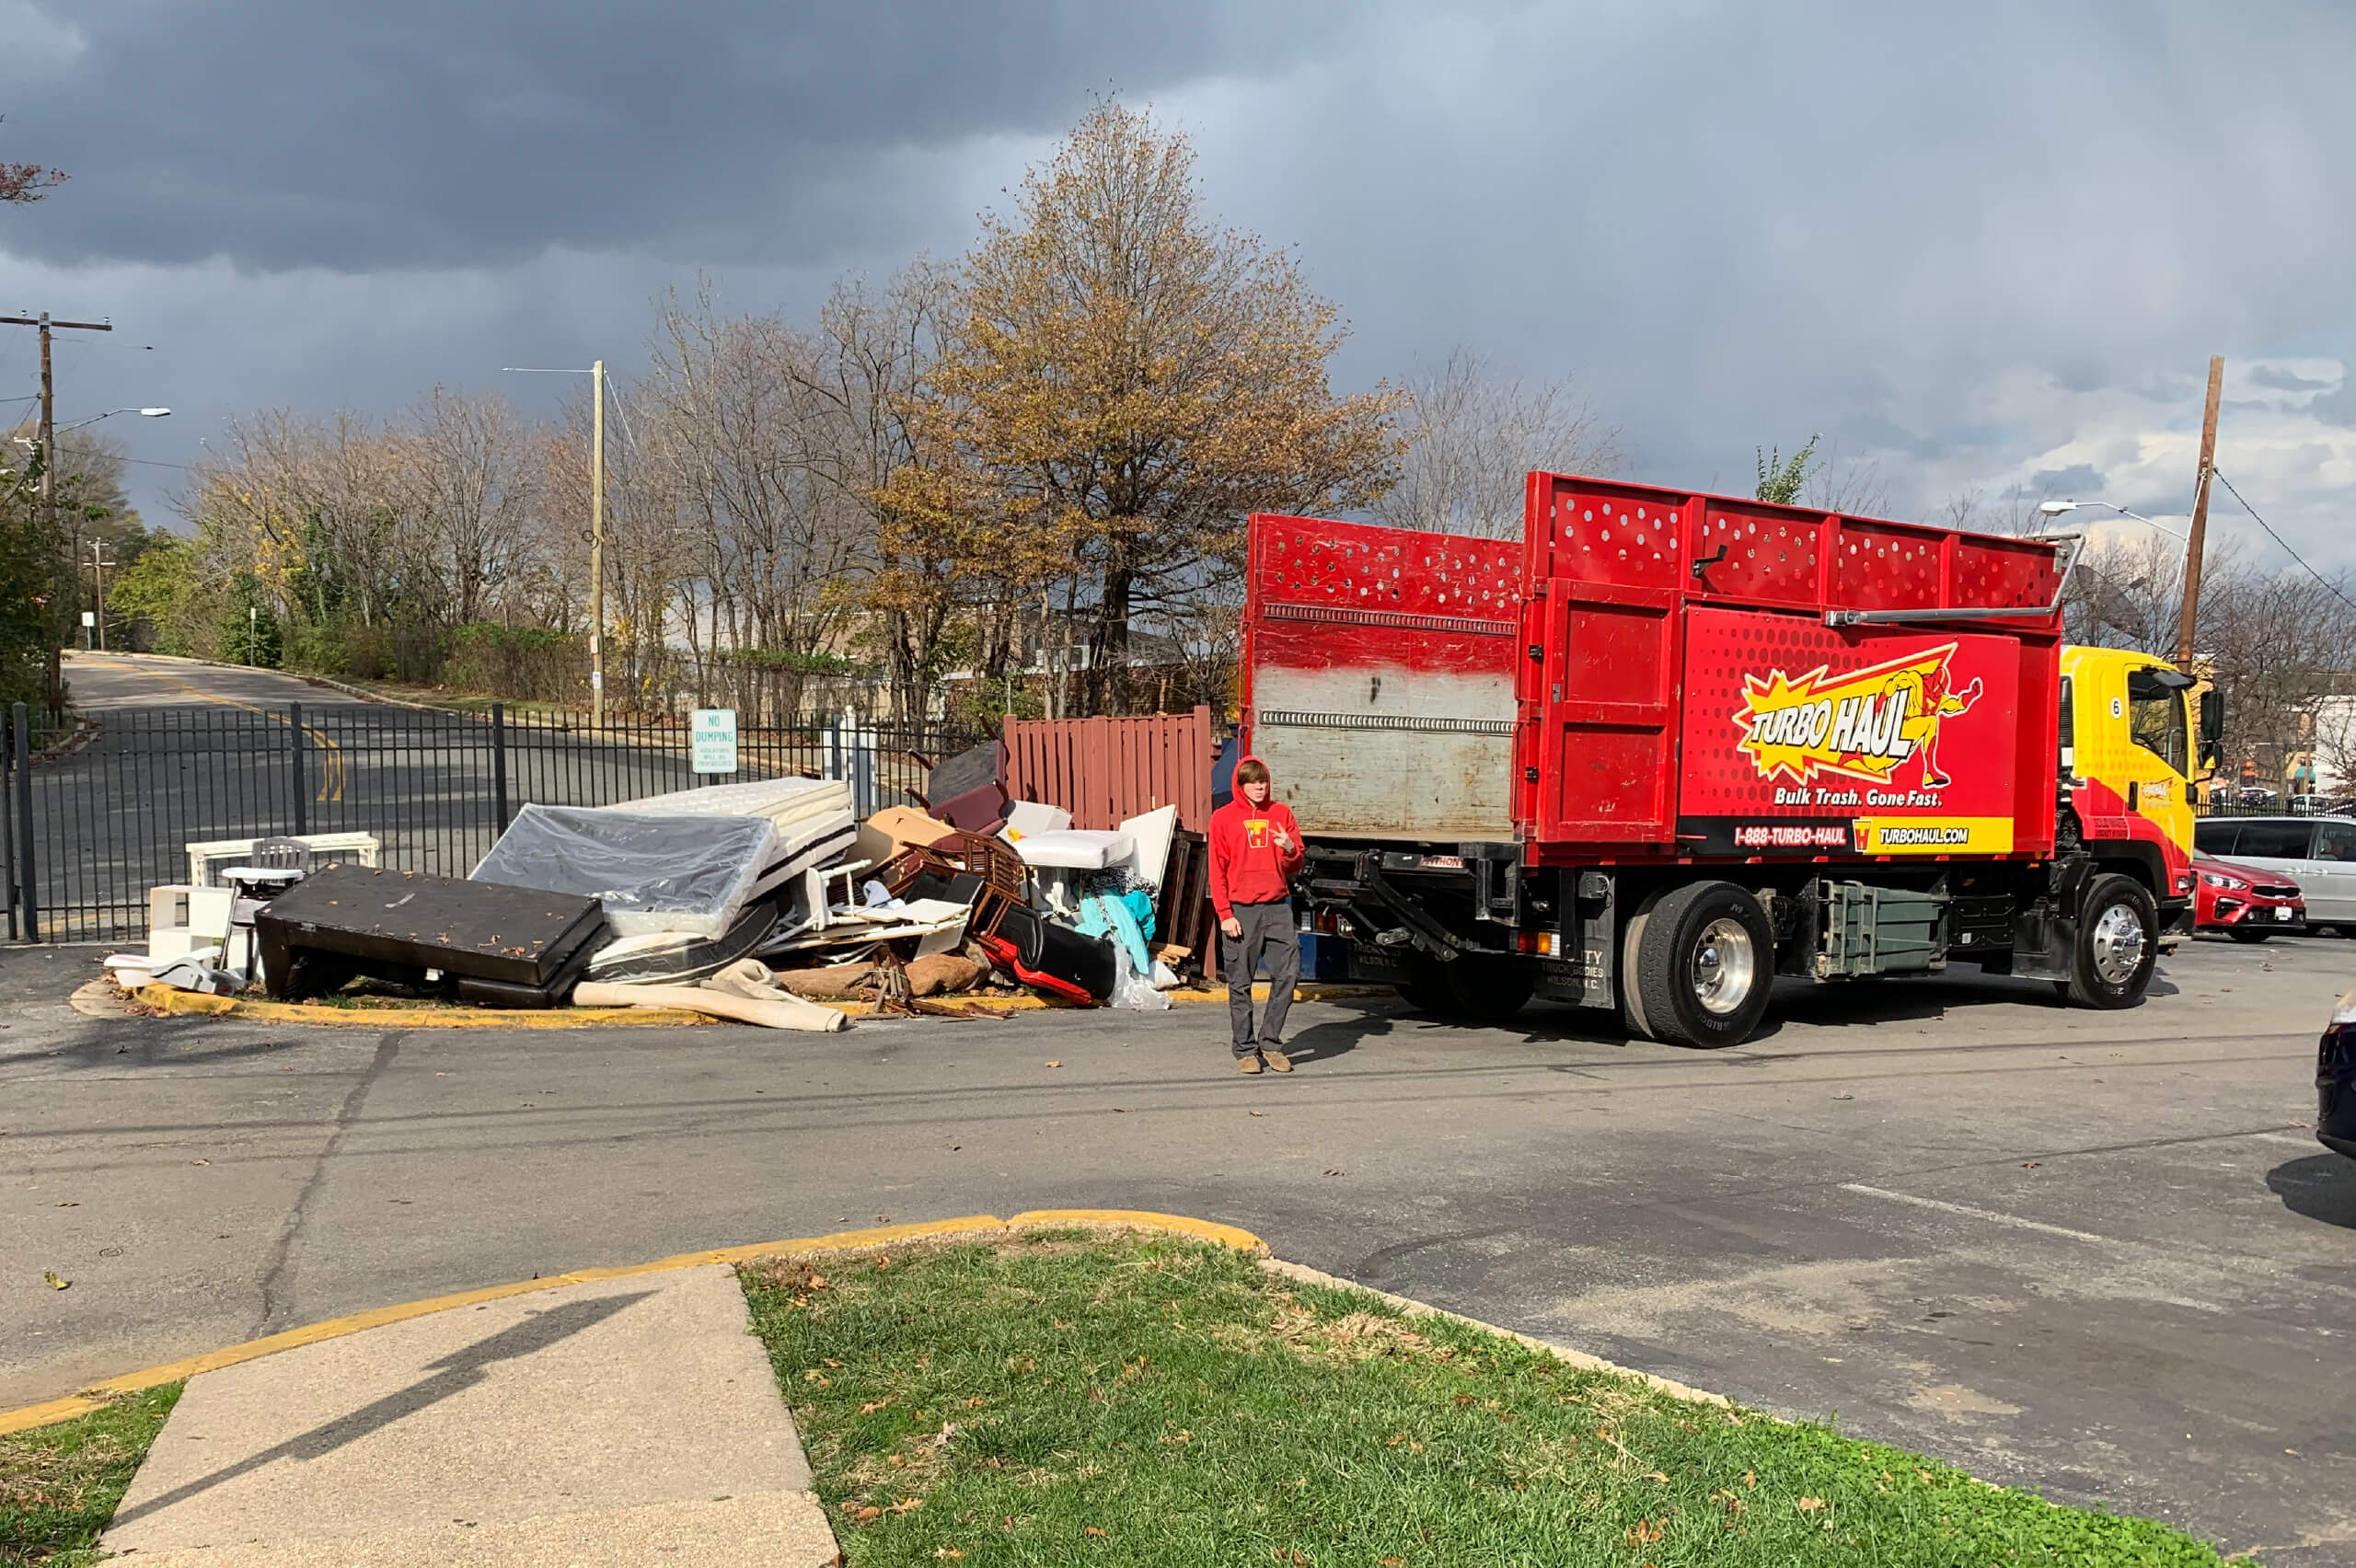 A TurboHaul employee walks from their big red junk hauling and bulk trash removal trucks in Chevy Chase, Maryland.